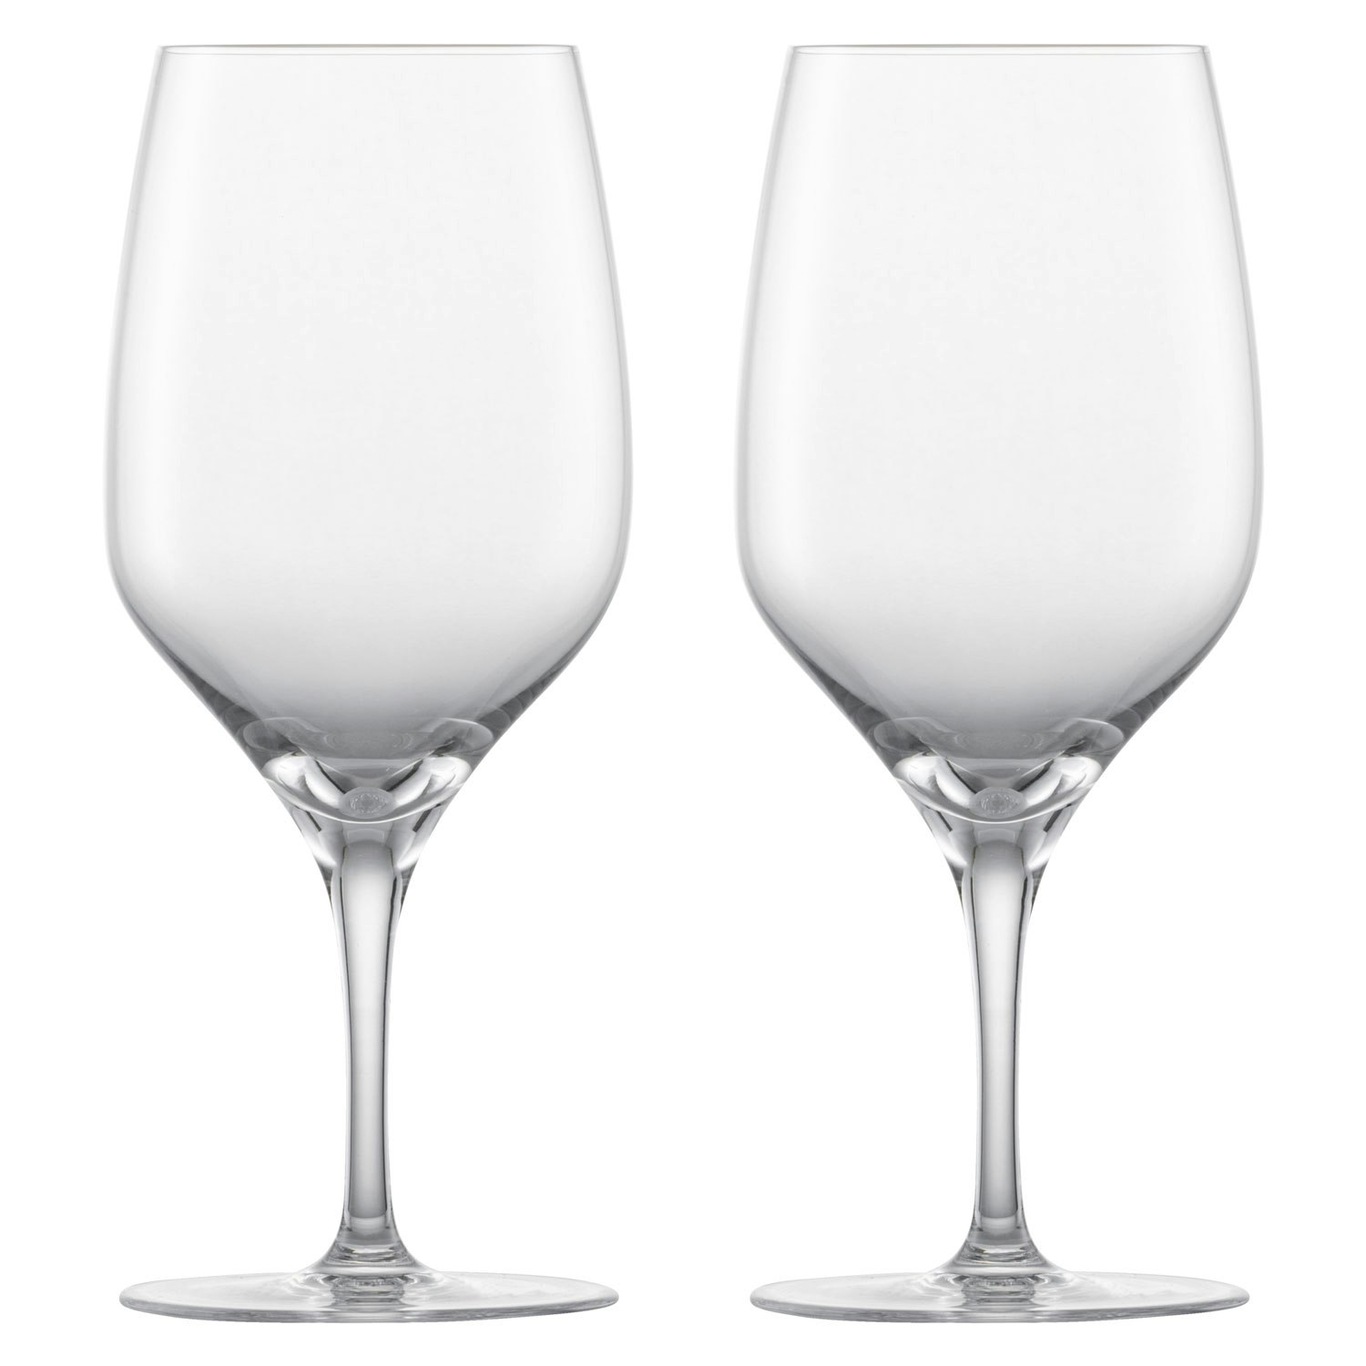 https://royaldesign.com/image/11/zweisel-alloro-water-glass-40-cl-2-pack-0?w=800&quality=80